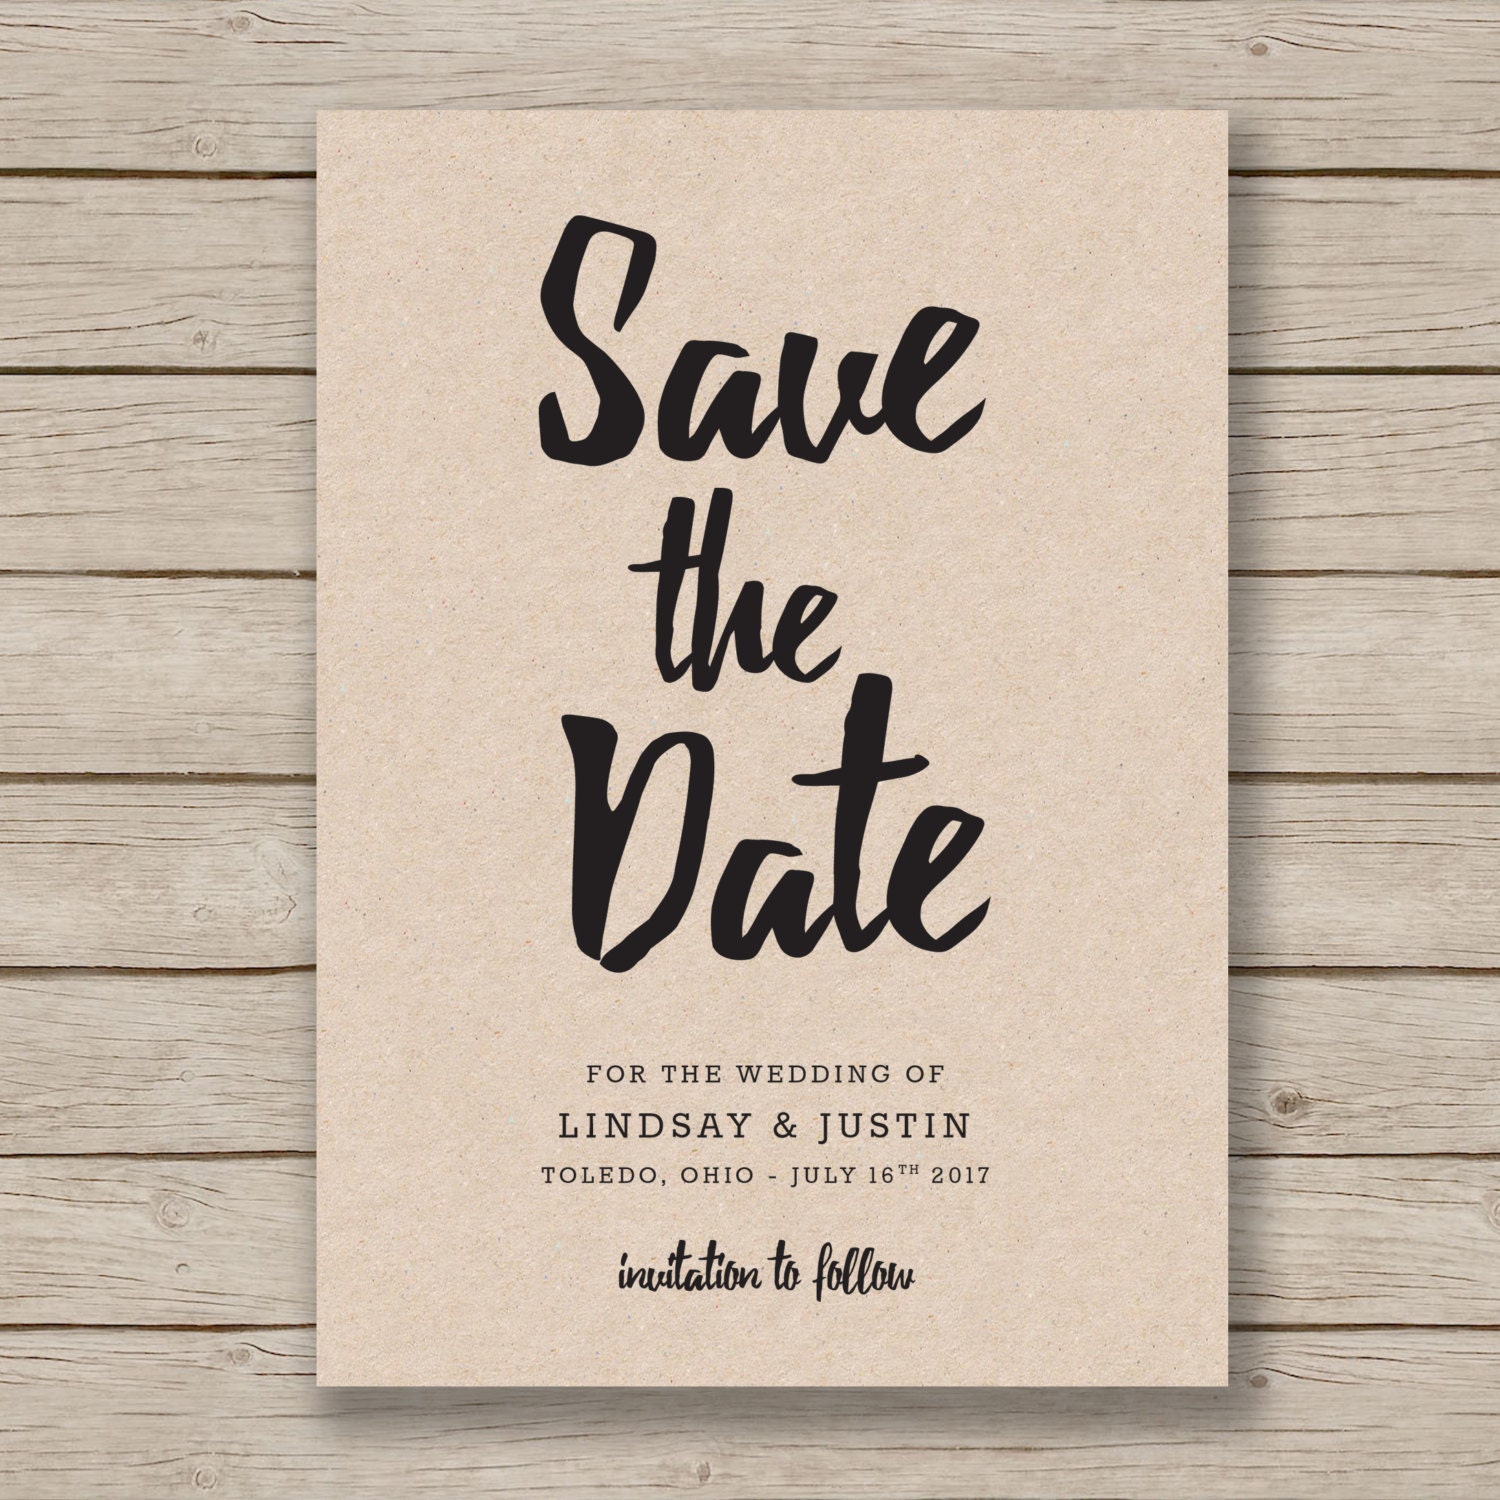 Save the Date Template EDITABLE by YOU in Word DIY Wedding